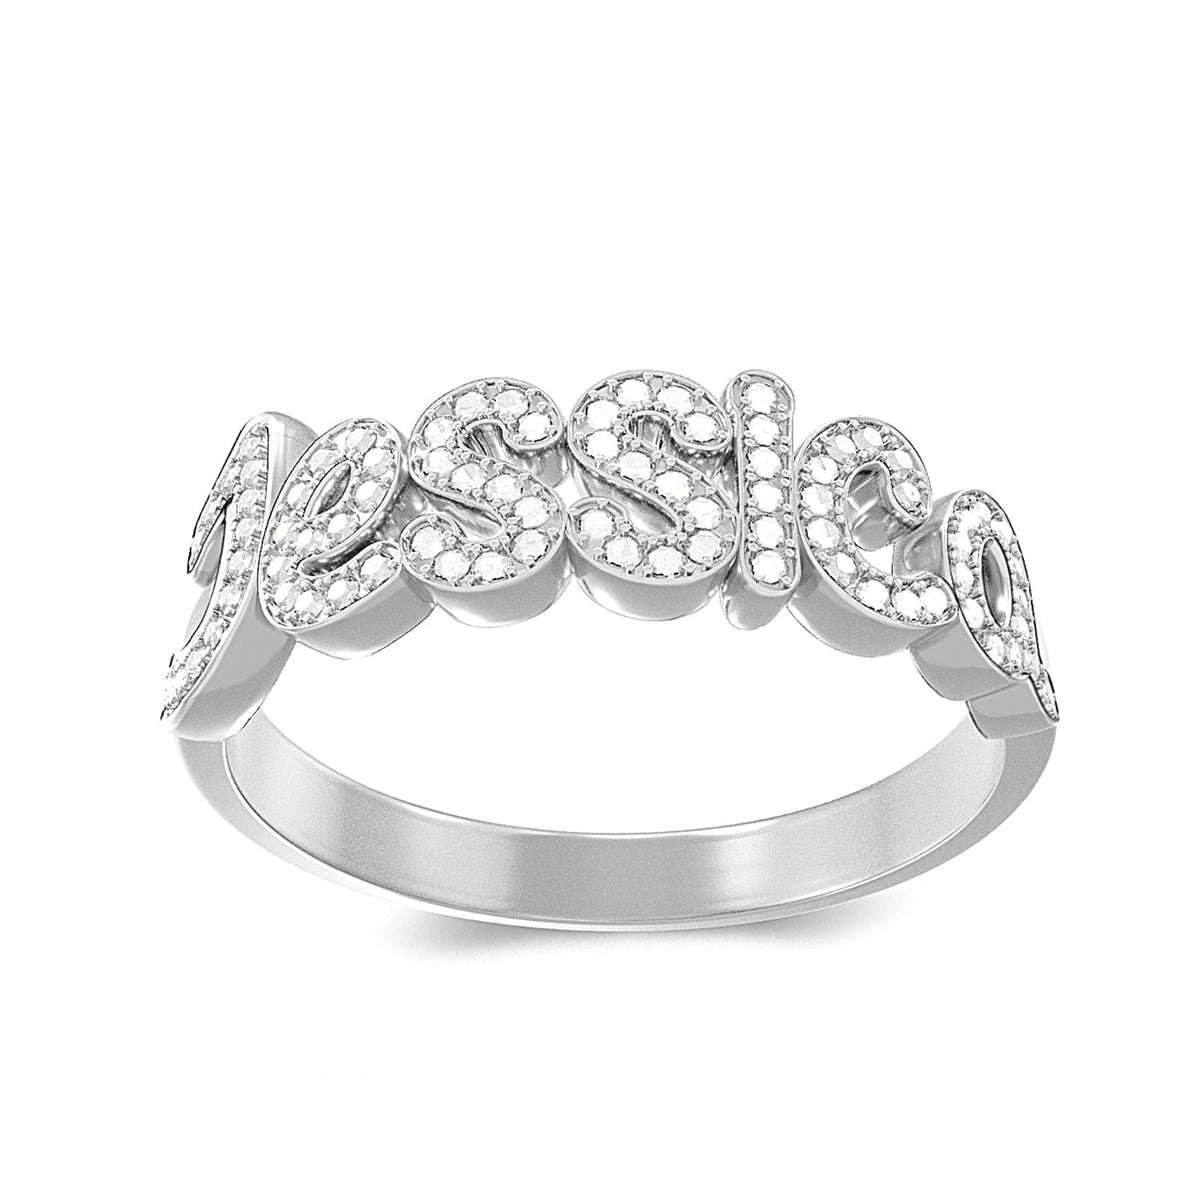 Sterling Silver Script Name Ring with Cubic Zirconia Stones